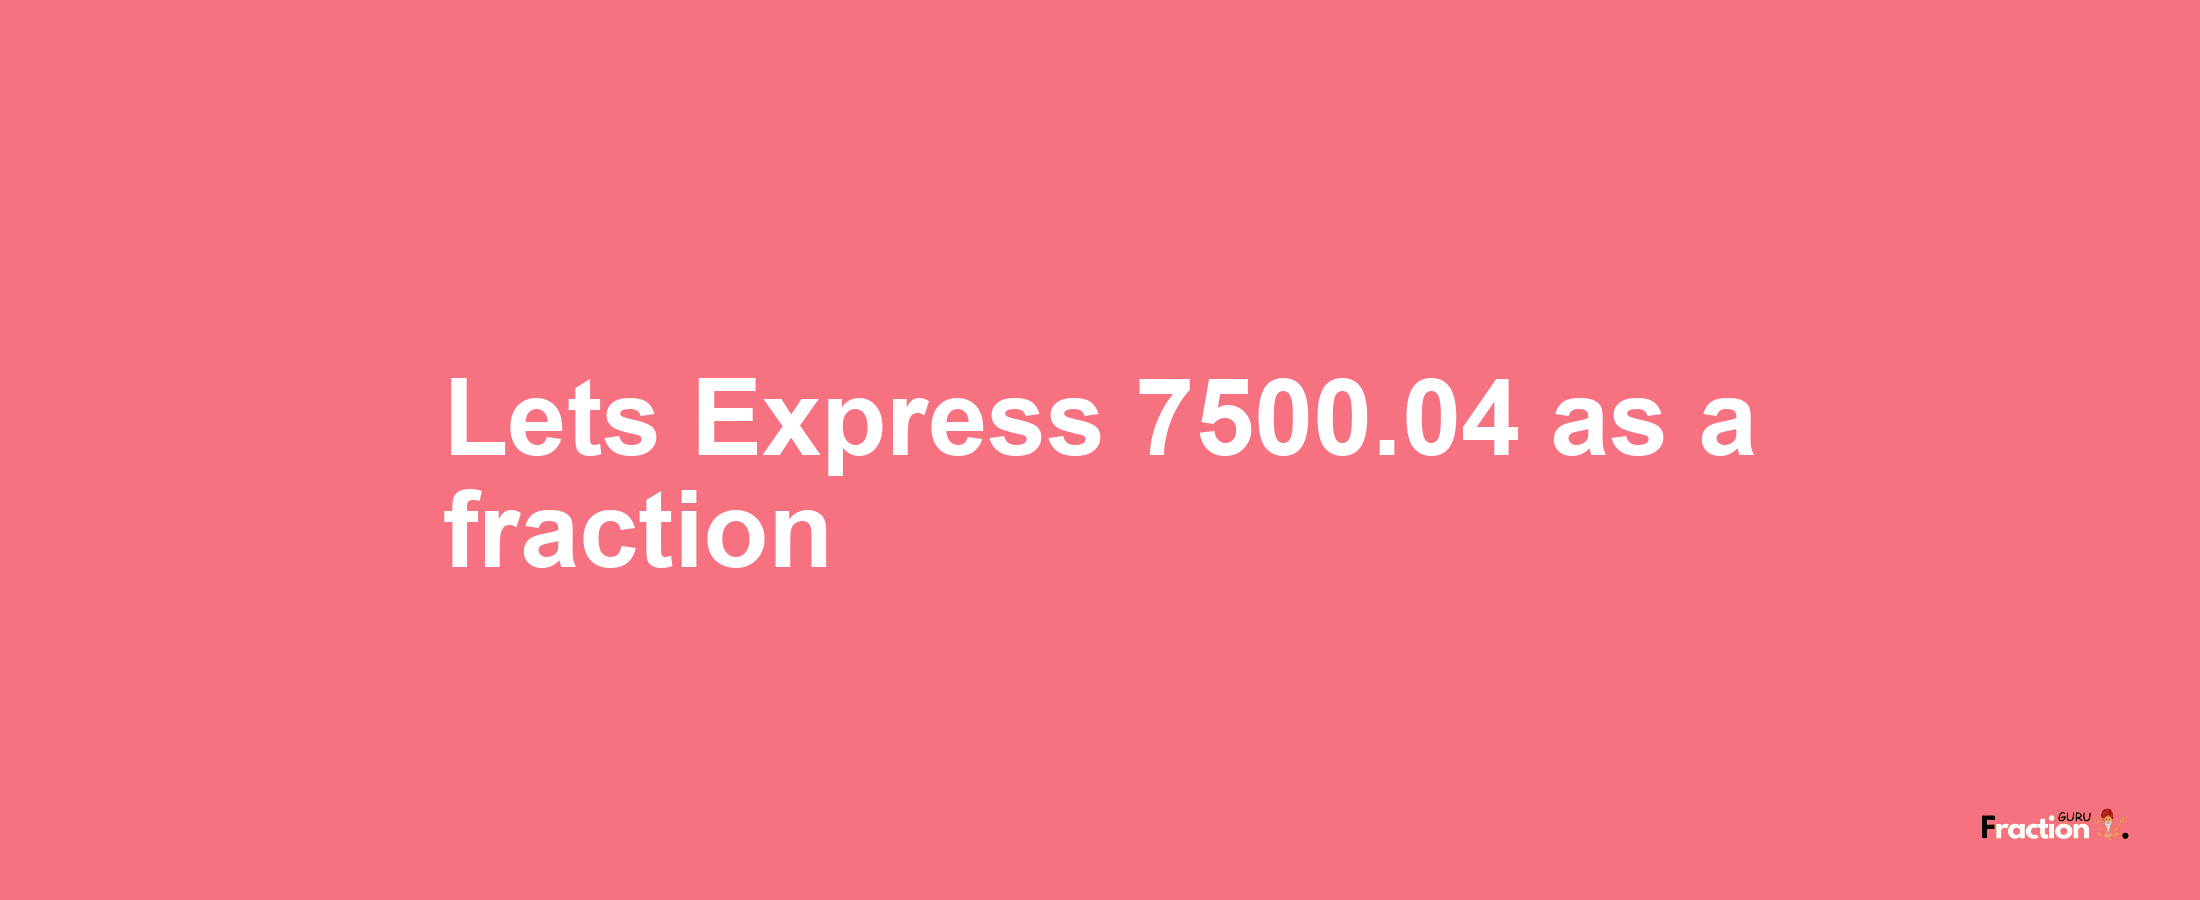 Lets Express 7500.04 as afraction